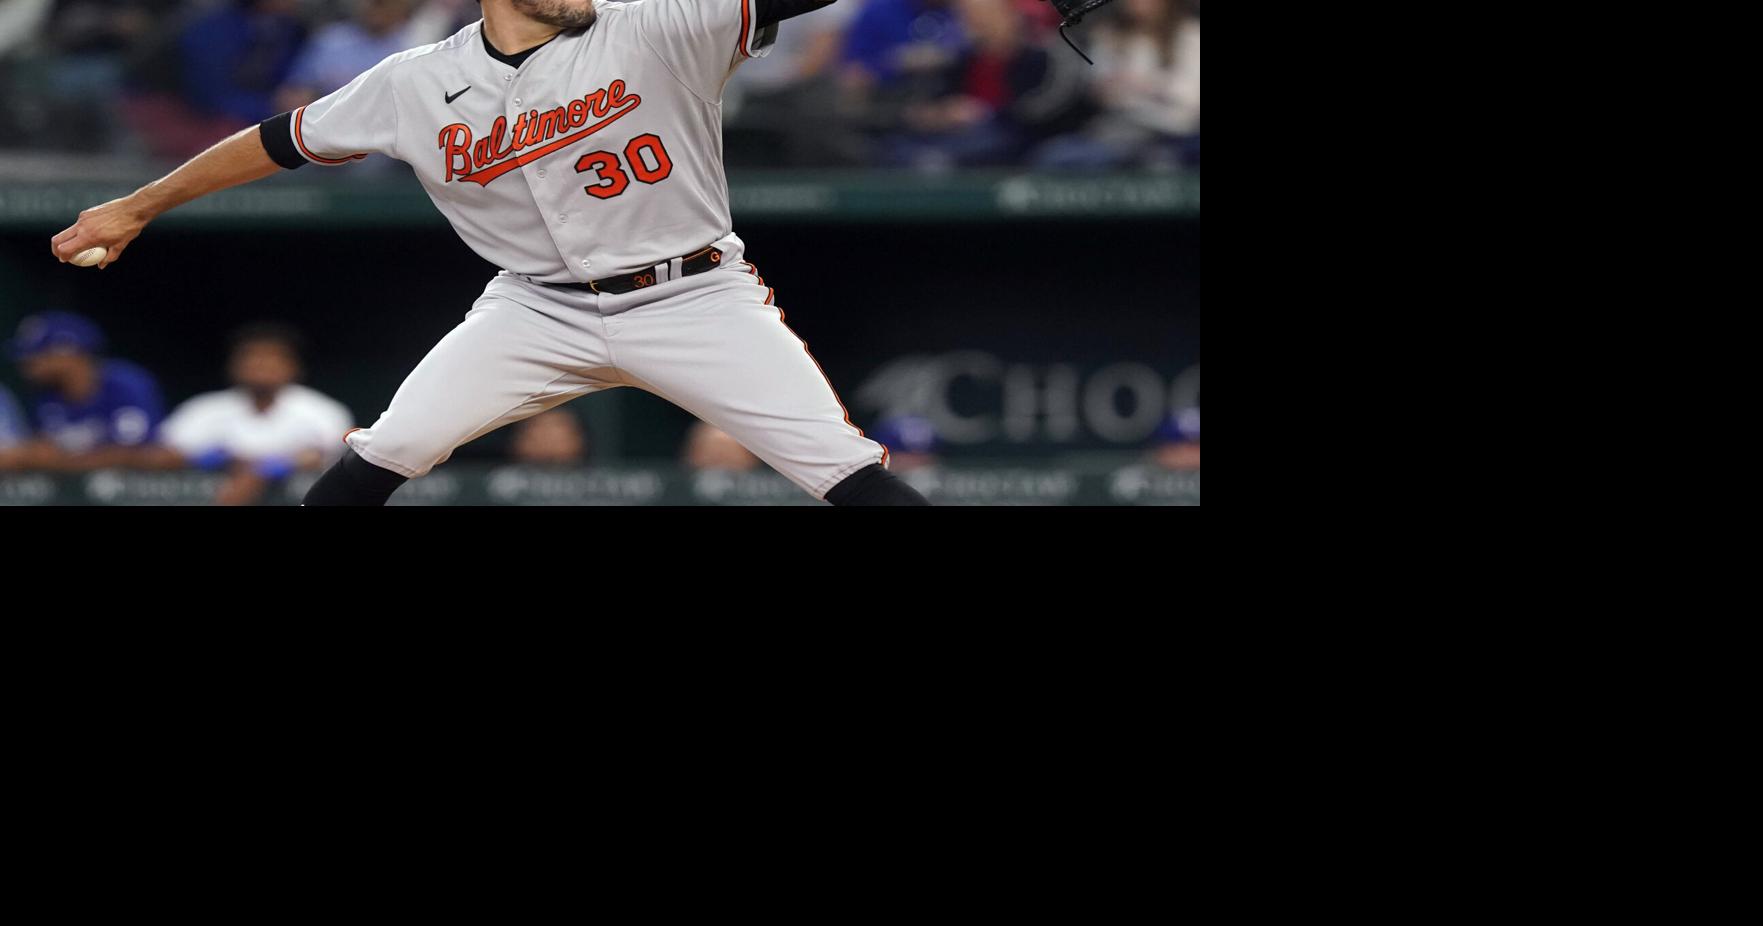 What's your favorite Orioles jersey or giveaway that you own